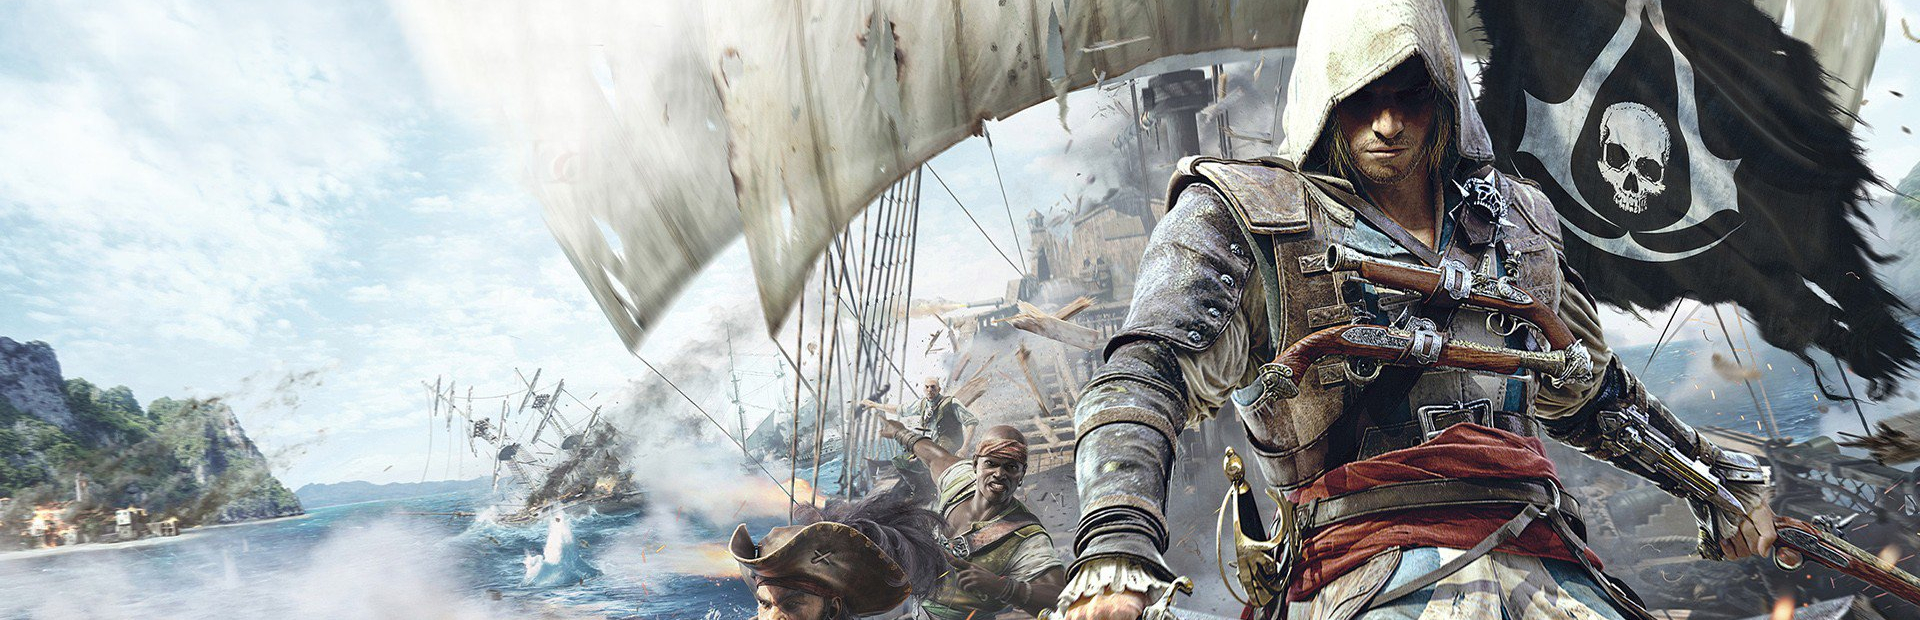 Steam assassin creed iv фото 93